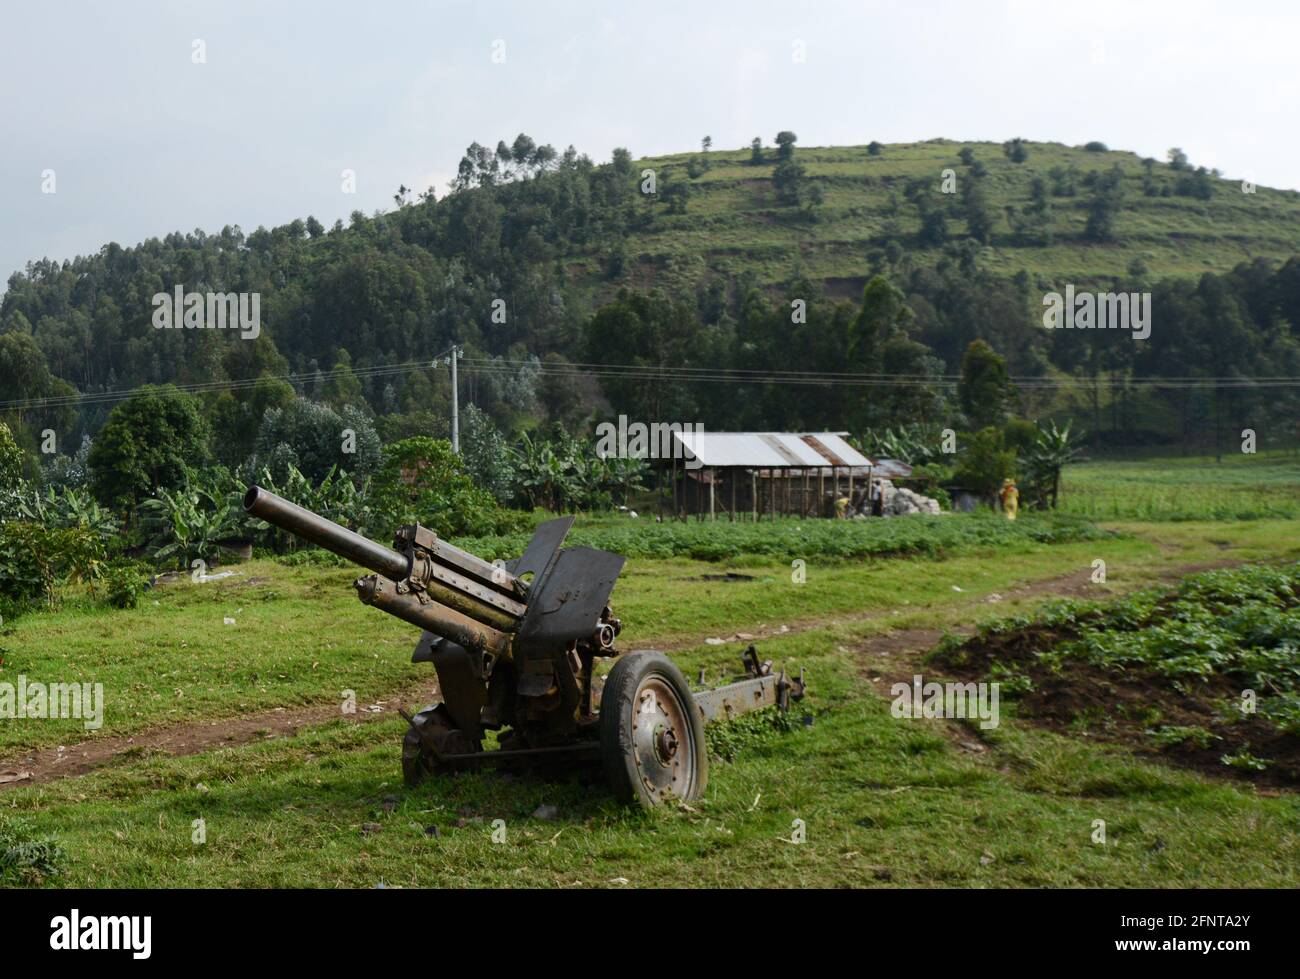 A Congolese army canon in north Kivu province. Eastern Congo has many domestic conflicts with armed militias an rebels. Stock Photo